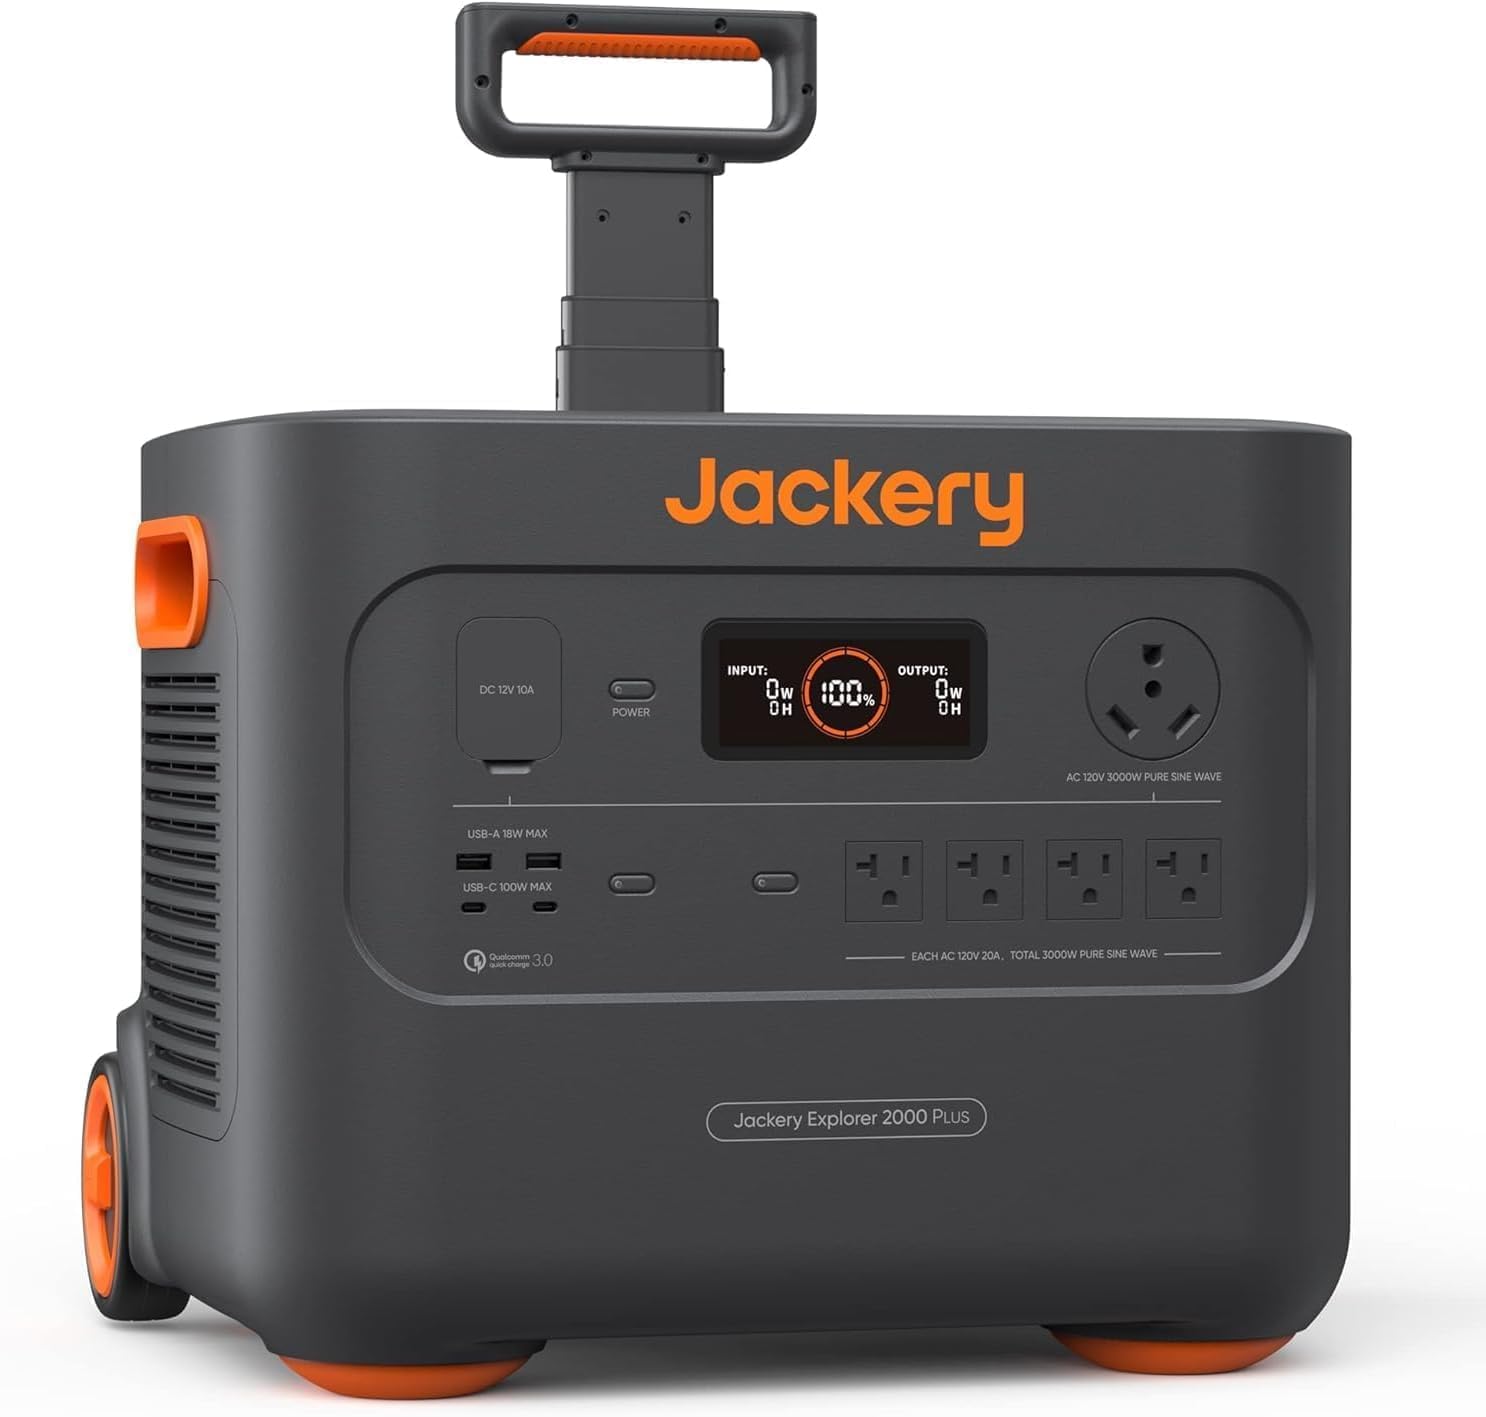 Jackery Portable Power Station Explorer 2000 Plus, Solar Generator with 2042Wh LiFePO4 Battery 3000W Output, Expandable to 24kWh 6000W, for Outdoor RV Camping & Emergency